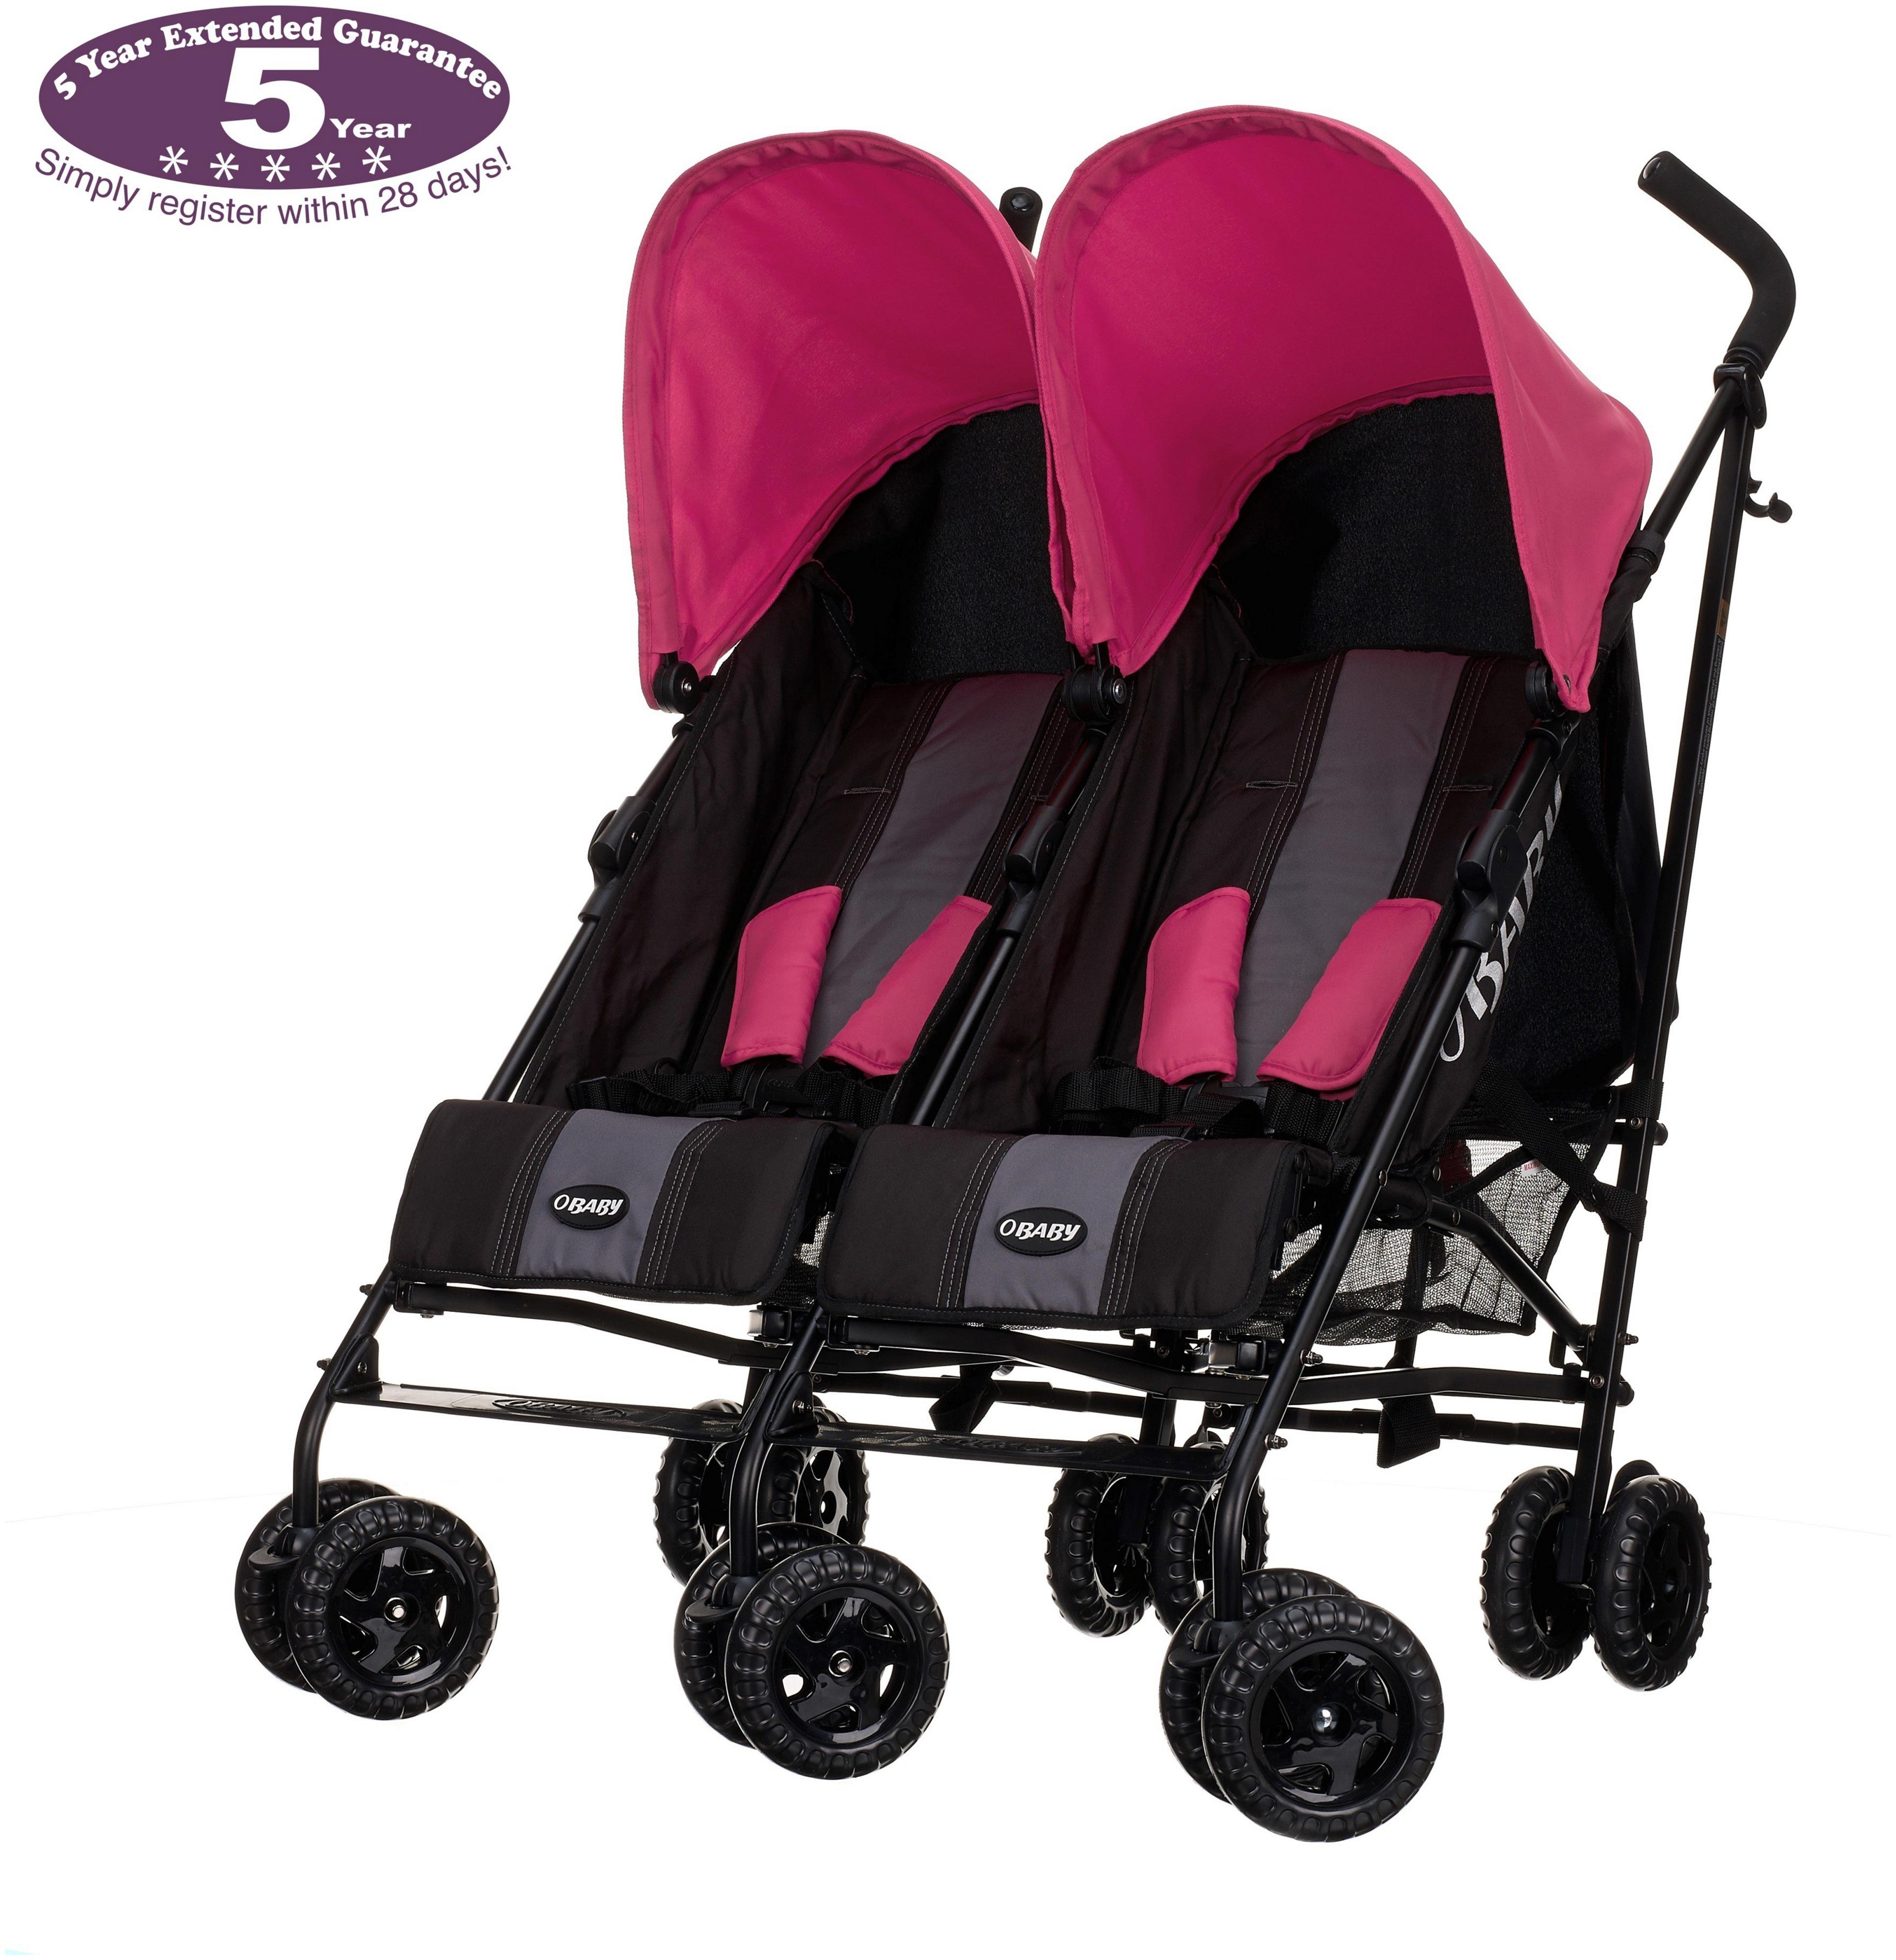 Obaby Apollo Black and Grey Double Pushchair - Pink